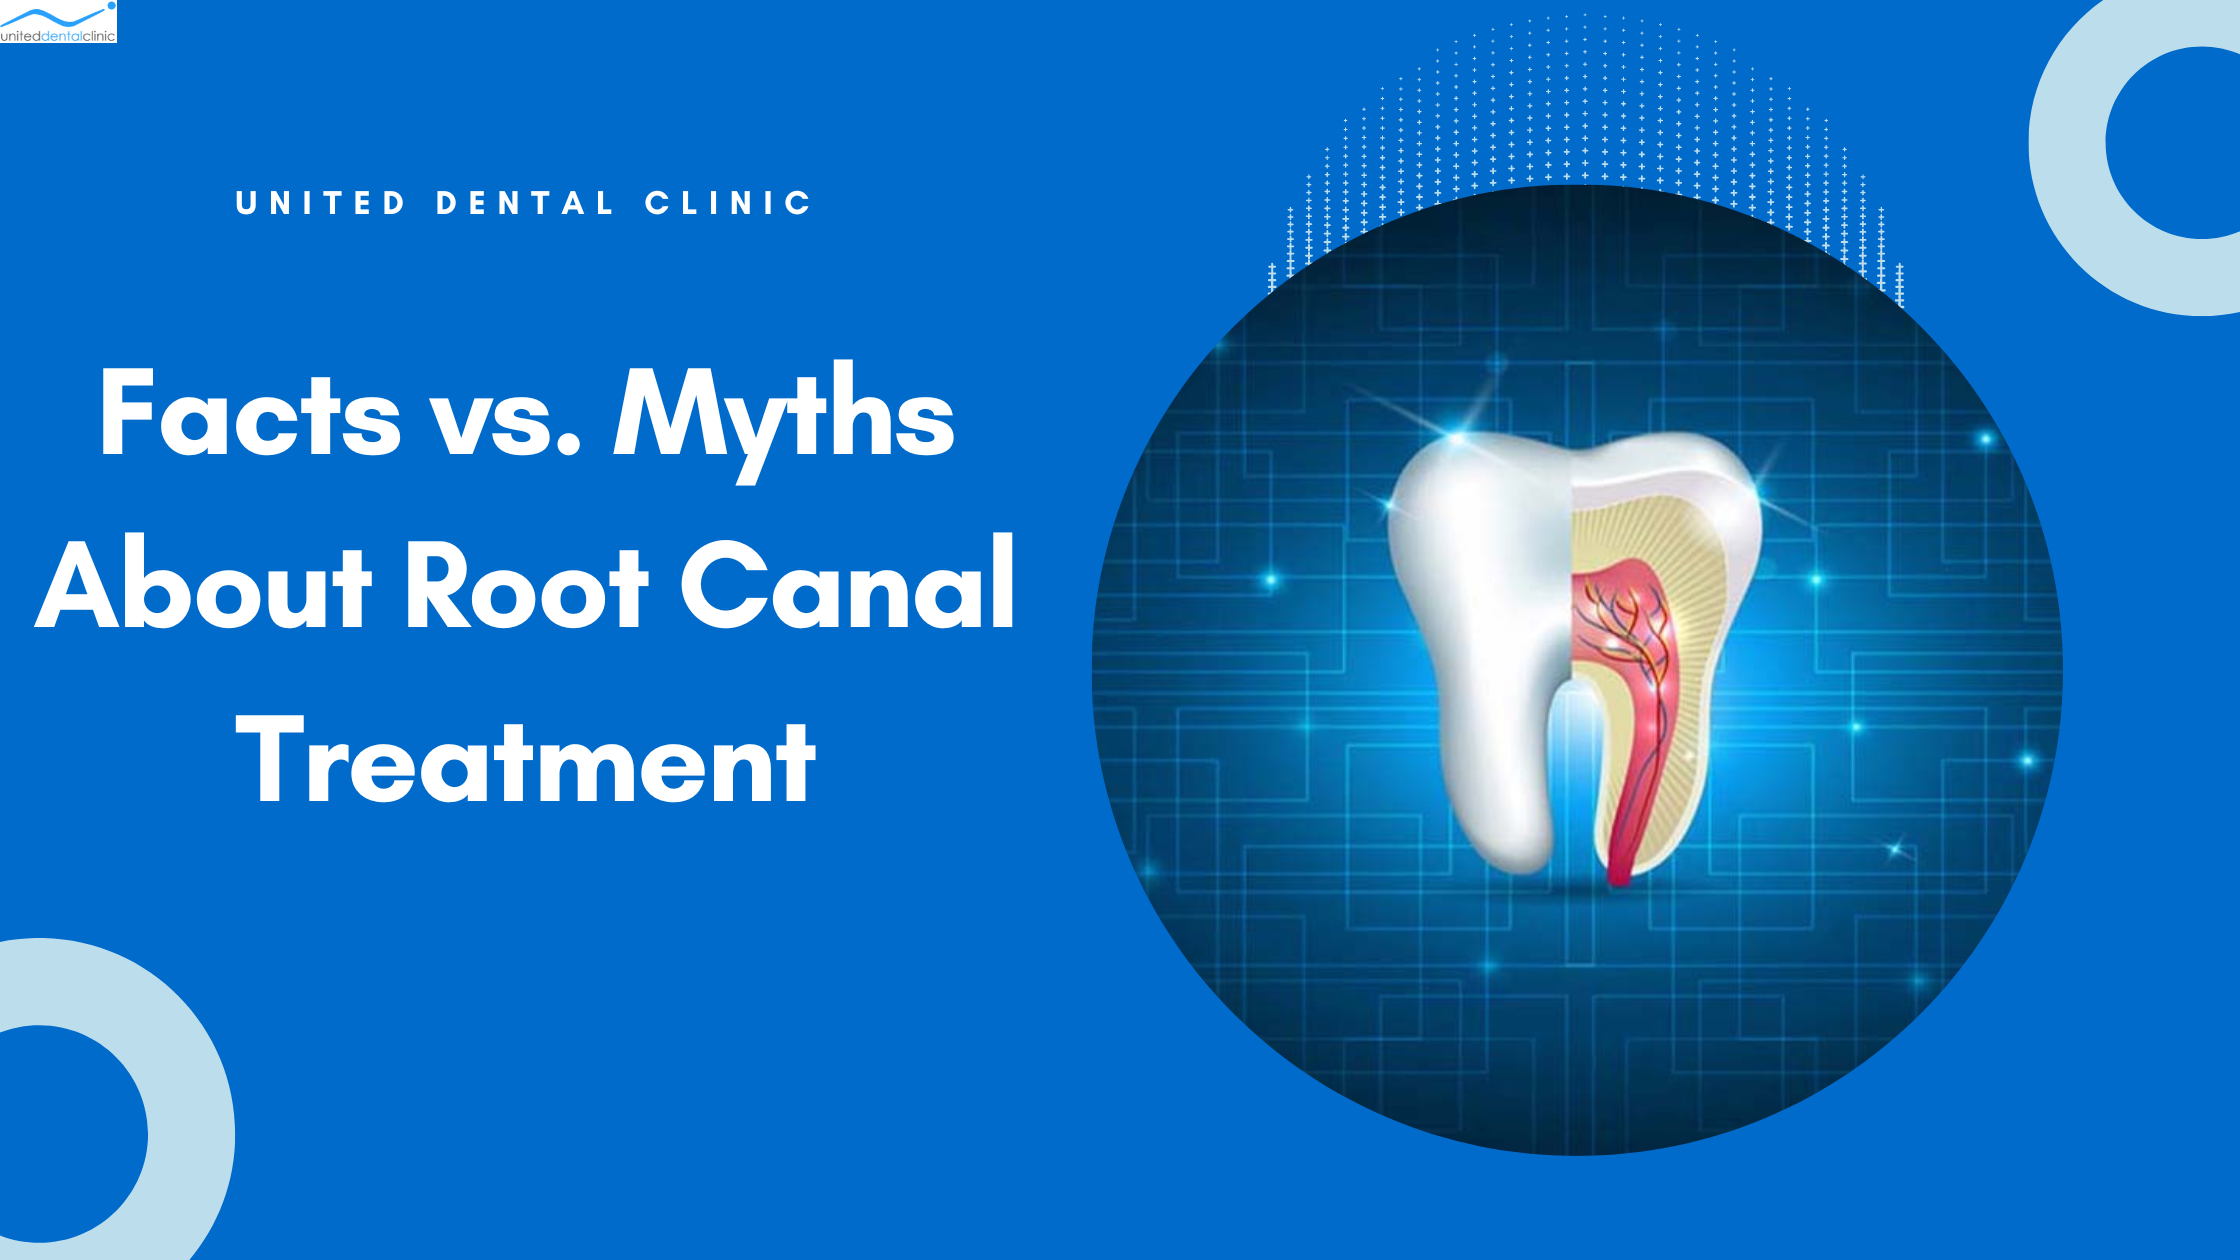 Facts vs. Myths About Root Canal Treatment